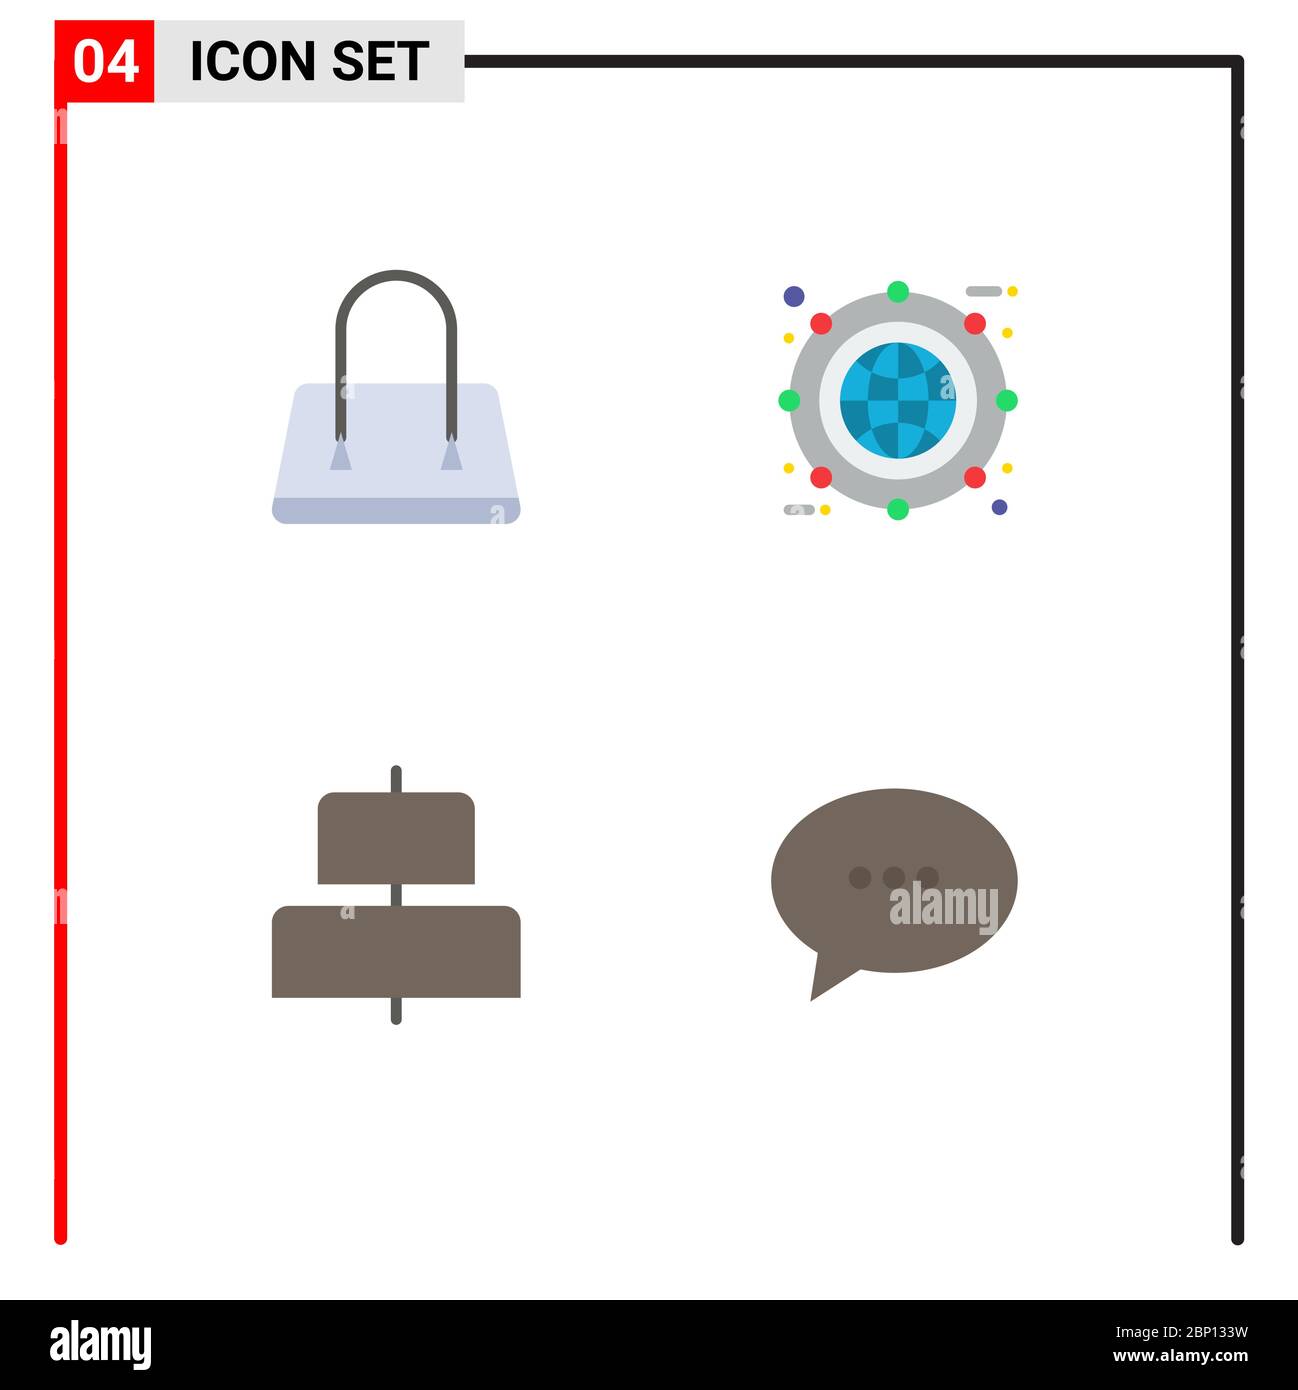 Pictogram Set of 4 Simple Flat Icons of bag, center, globe, expand, chat Editable Vector Design Elements Stock Vector